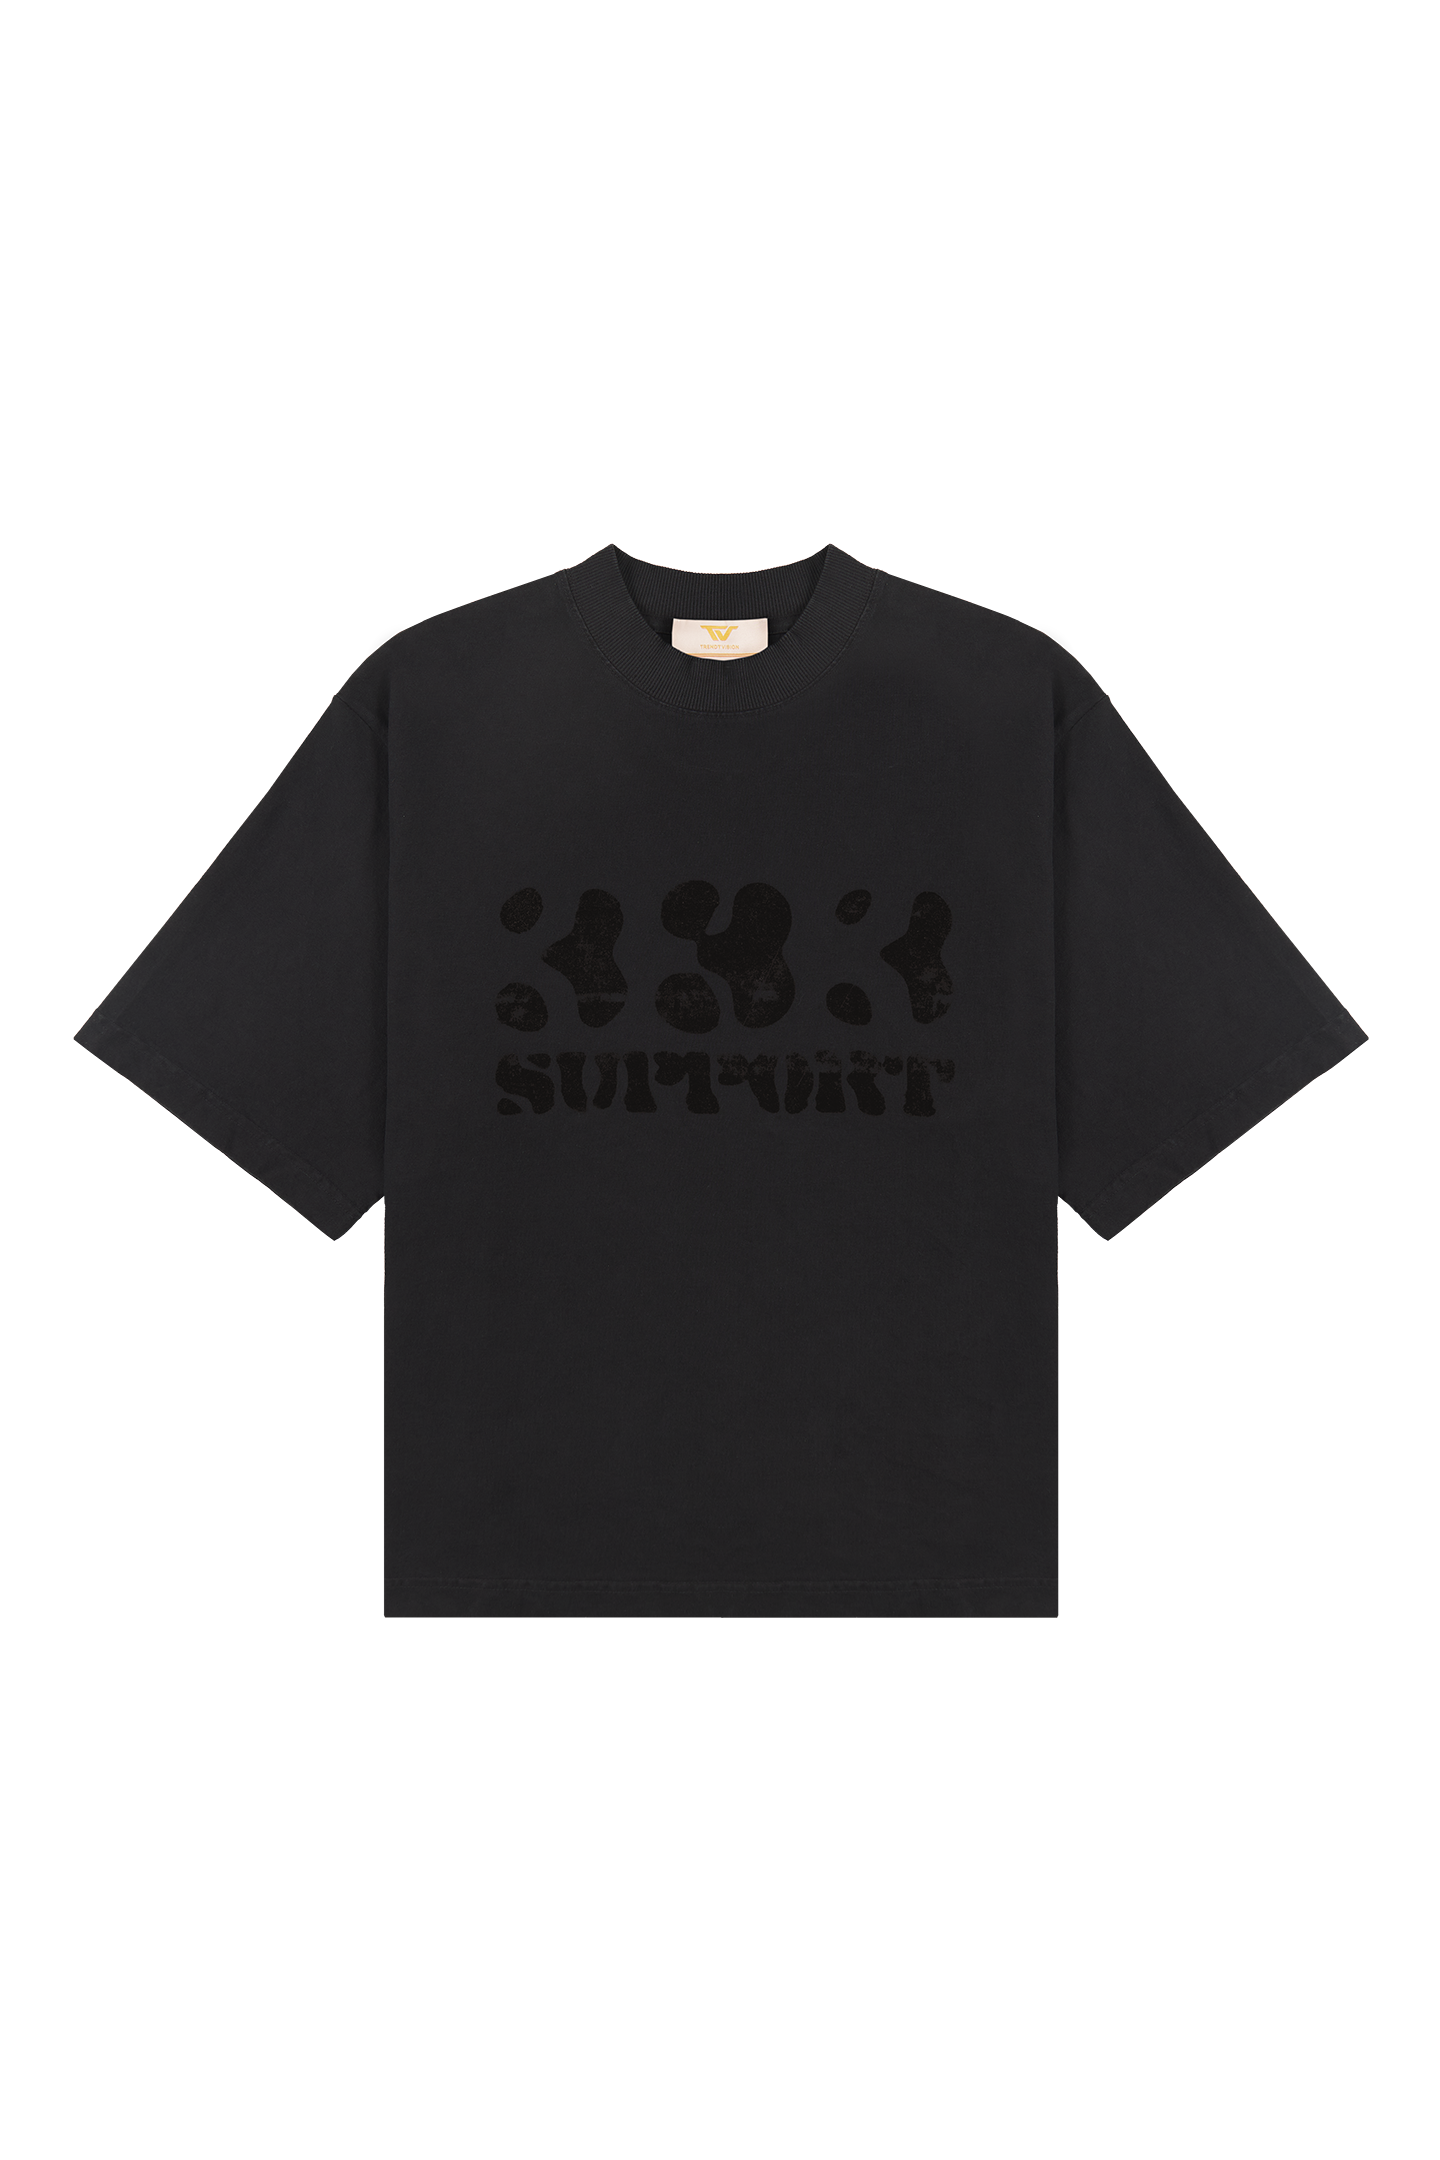 Black Support Tee